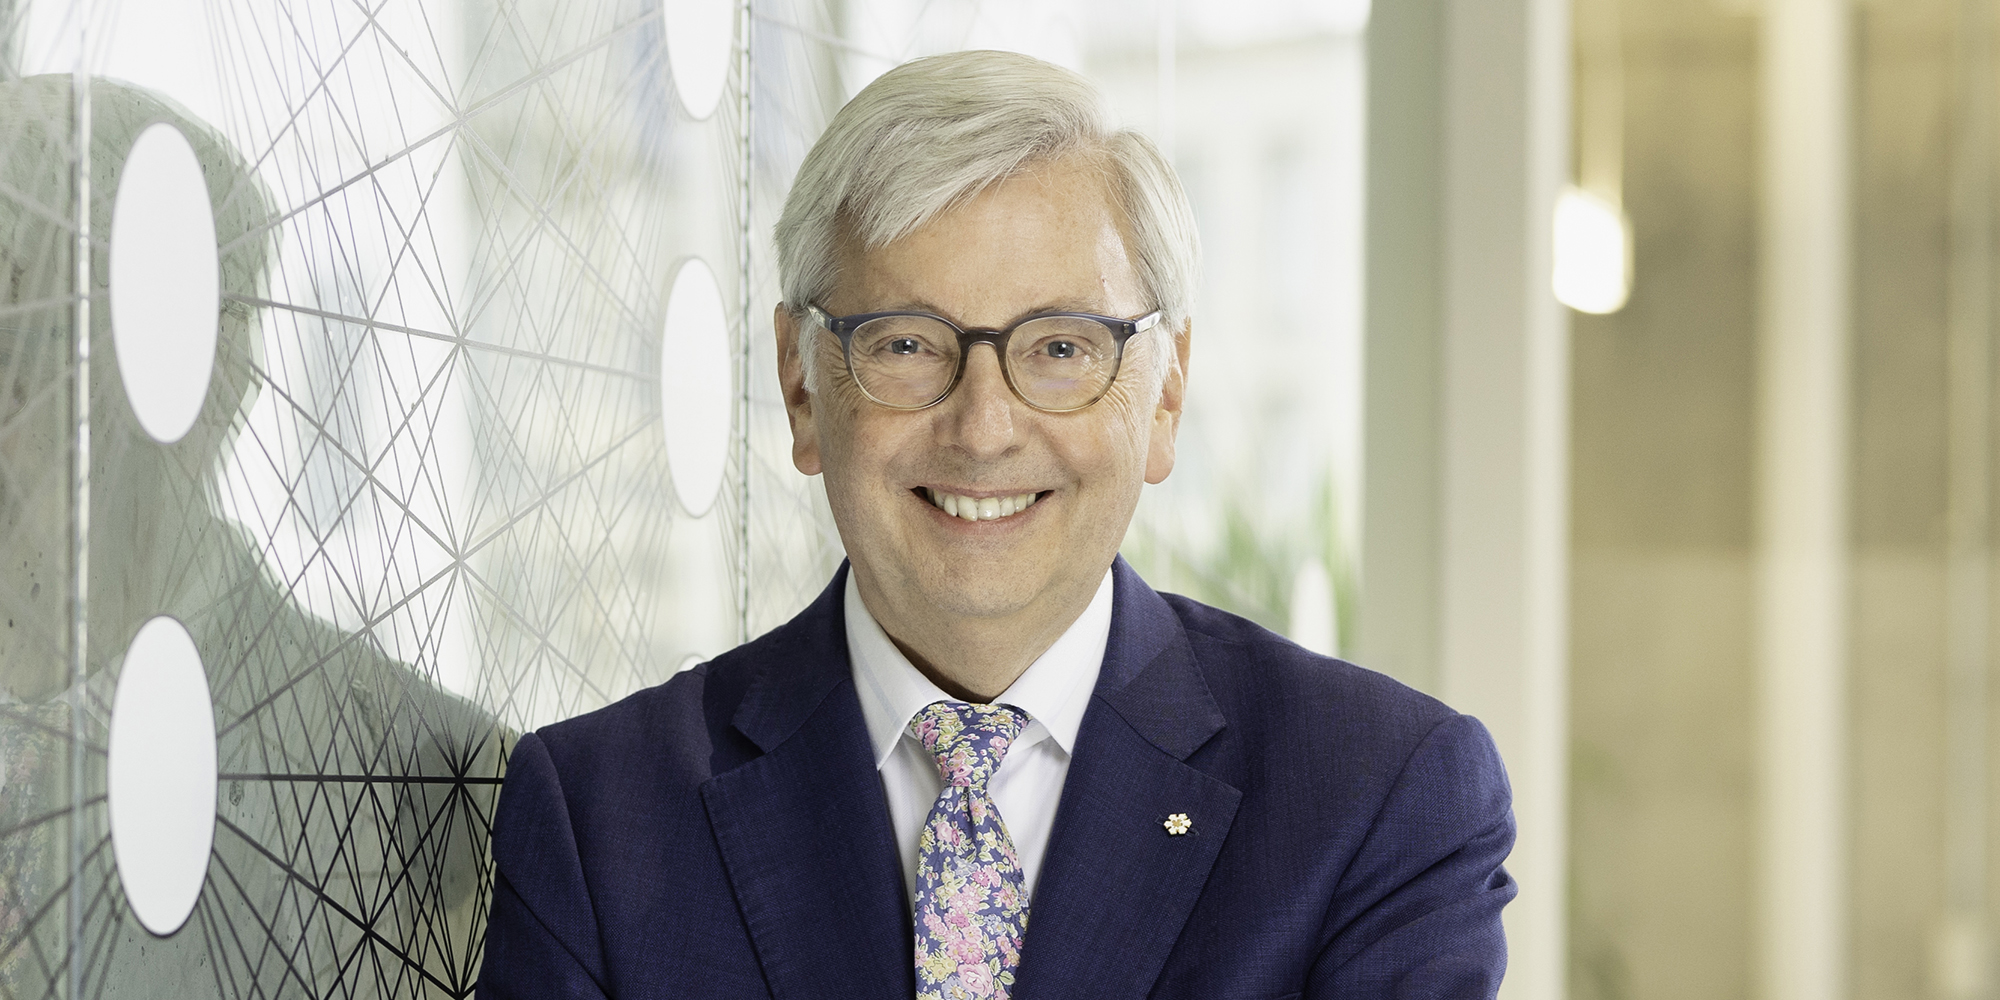 Stephen Toope, President and CEO of the Canadian Institute for Advanced Research (CIFAR) and previous (346th) Vice-Chancellor of Cambridge University and Honorary Fellow of Trinity College Cambridge